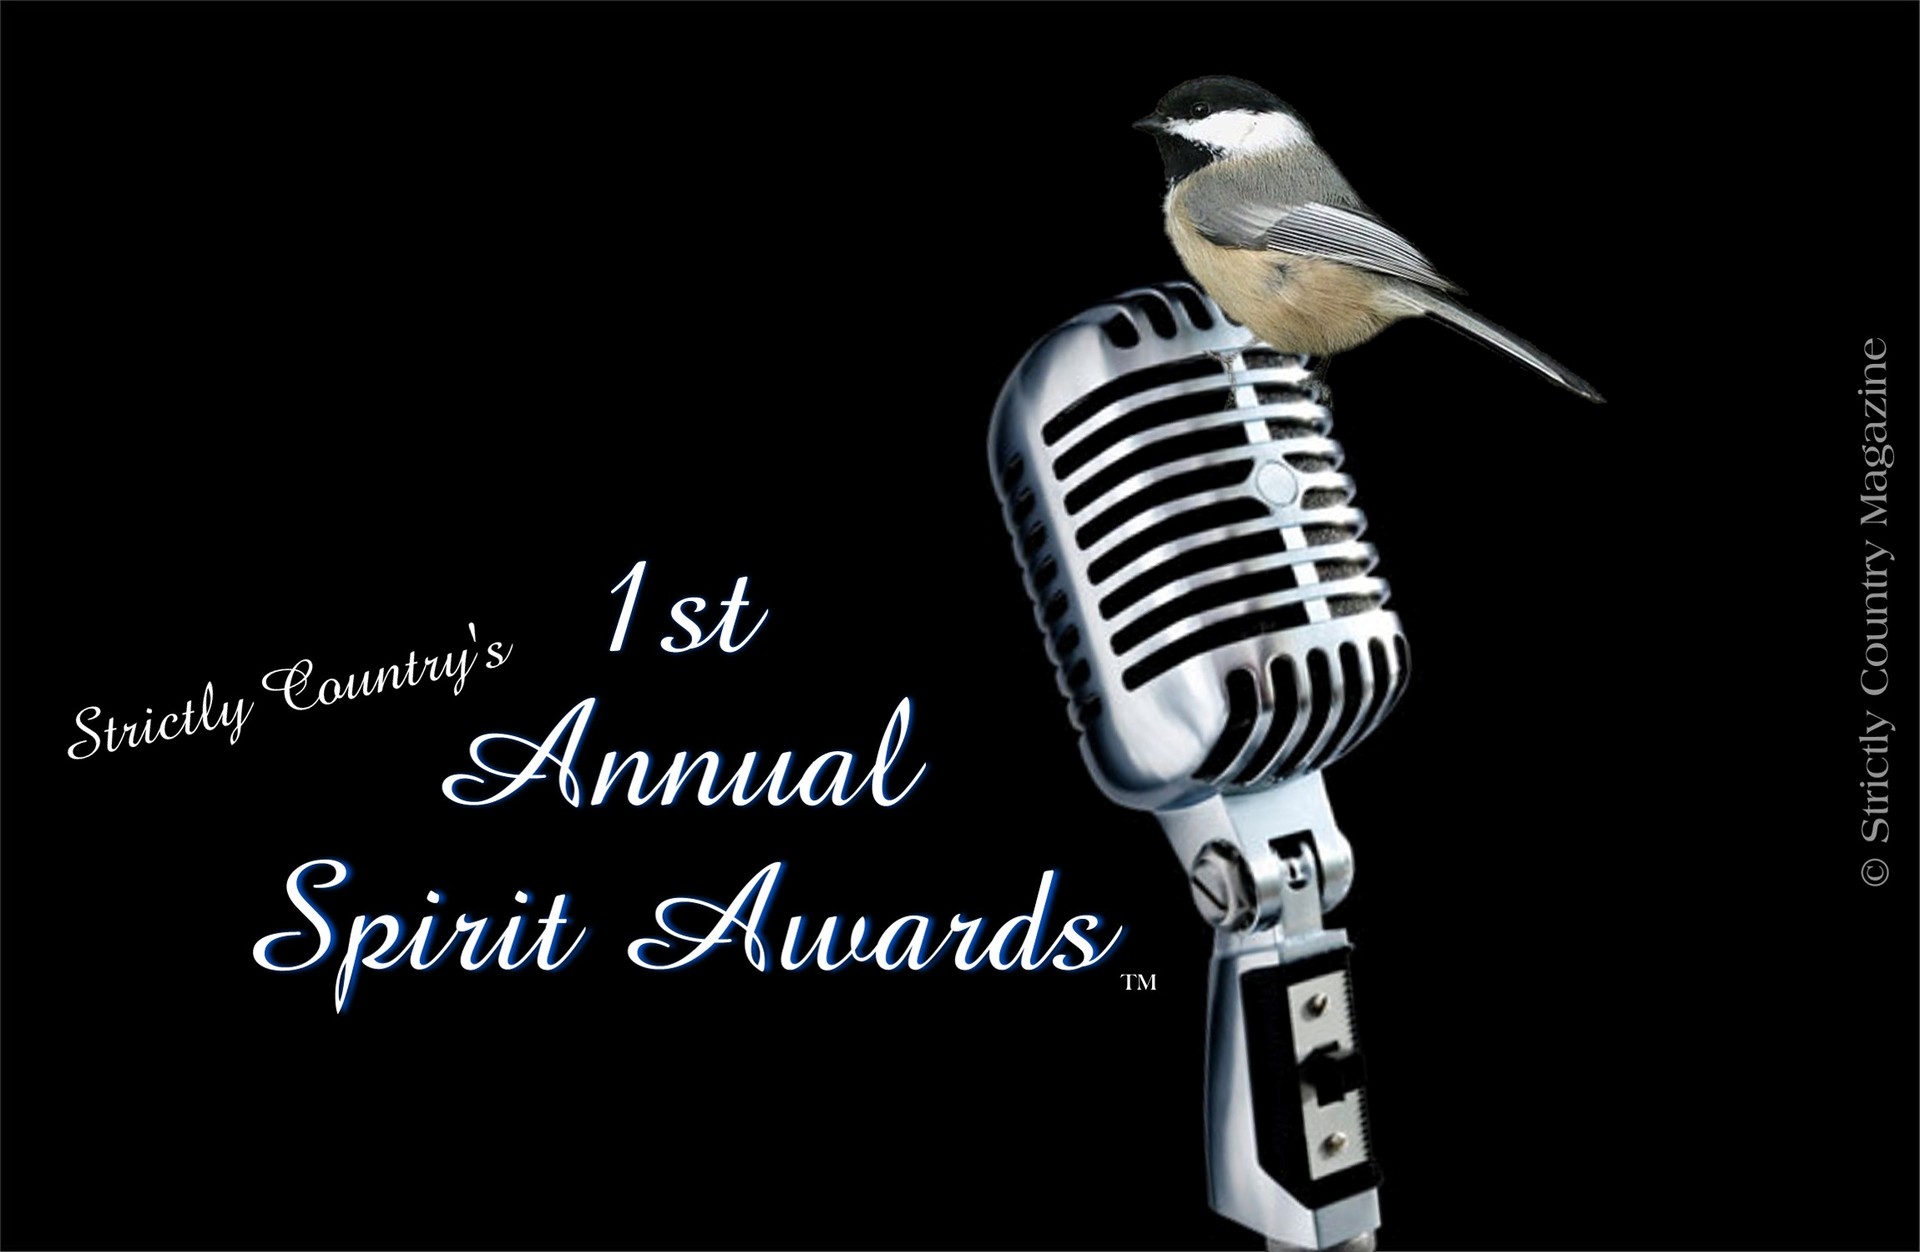 Strictly Country Magazine copyright 1st Annual Spirit Awards official logo